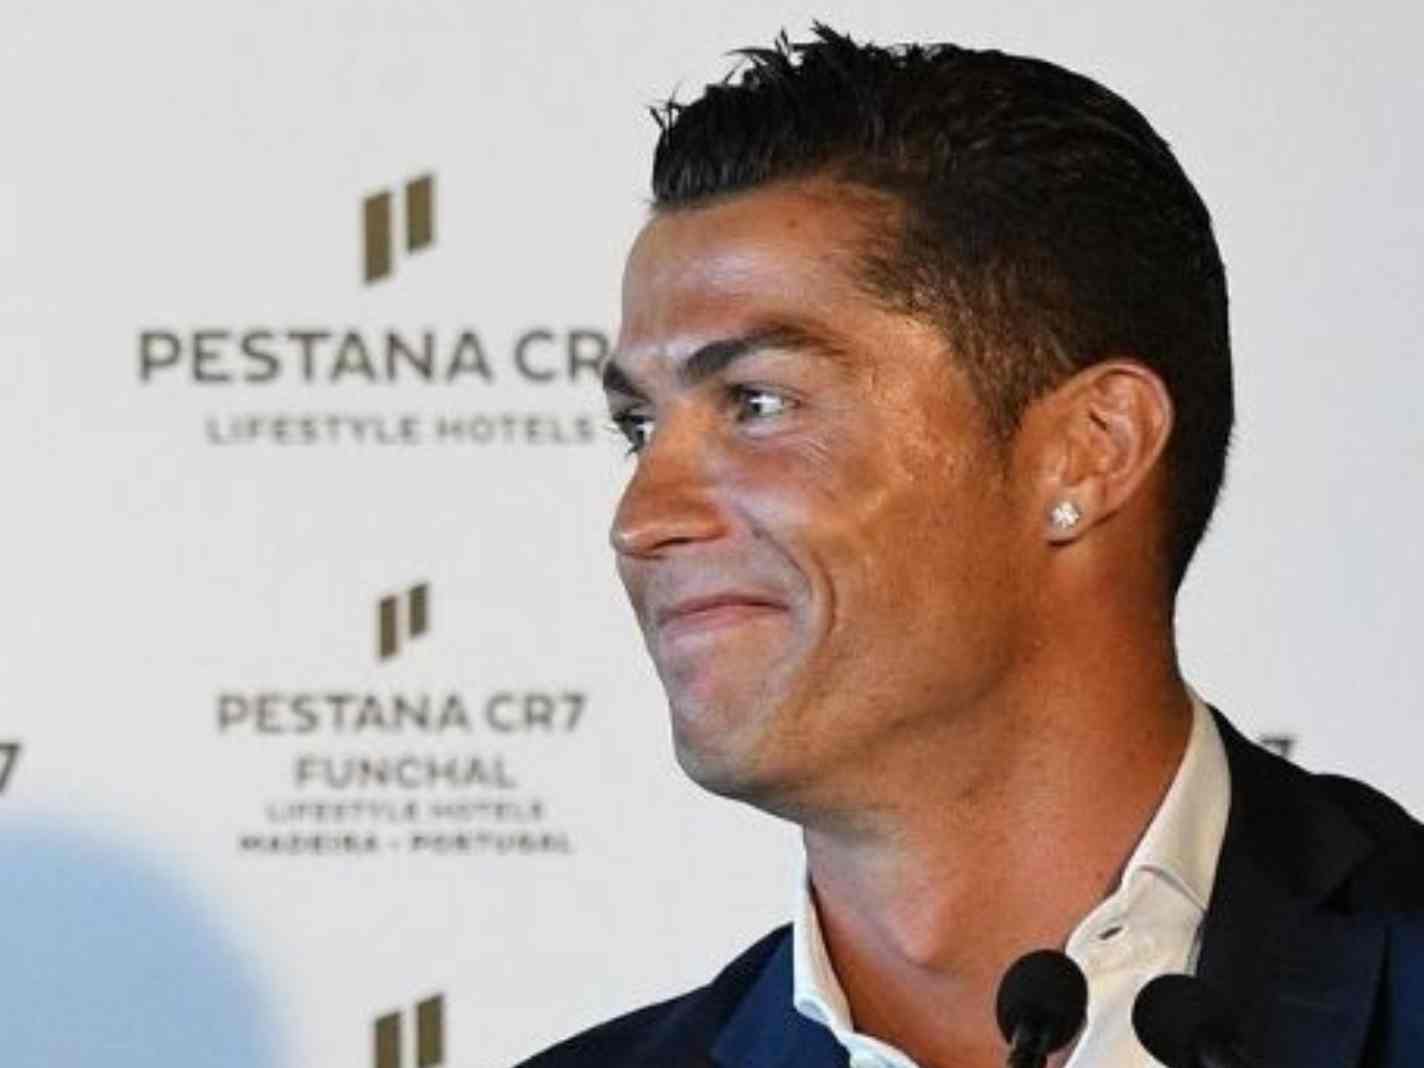 Is Cristiano Ronaldo More Than Just A Face Of The Pestana CR7 Hotel Chain?